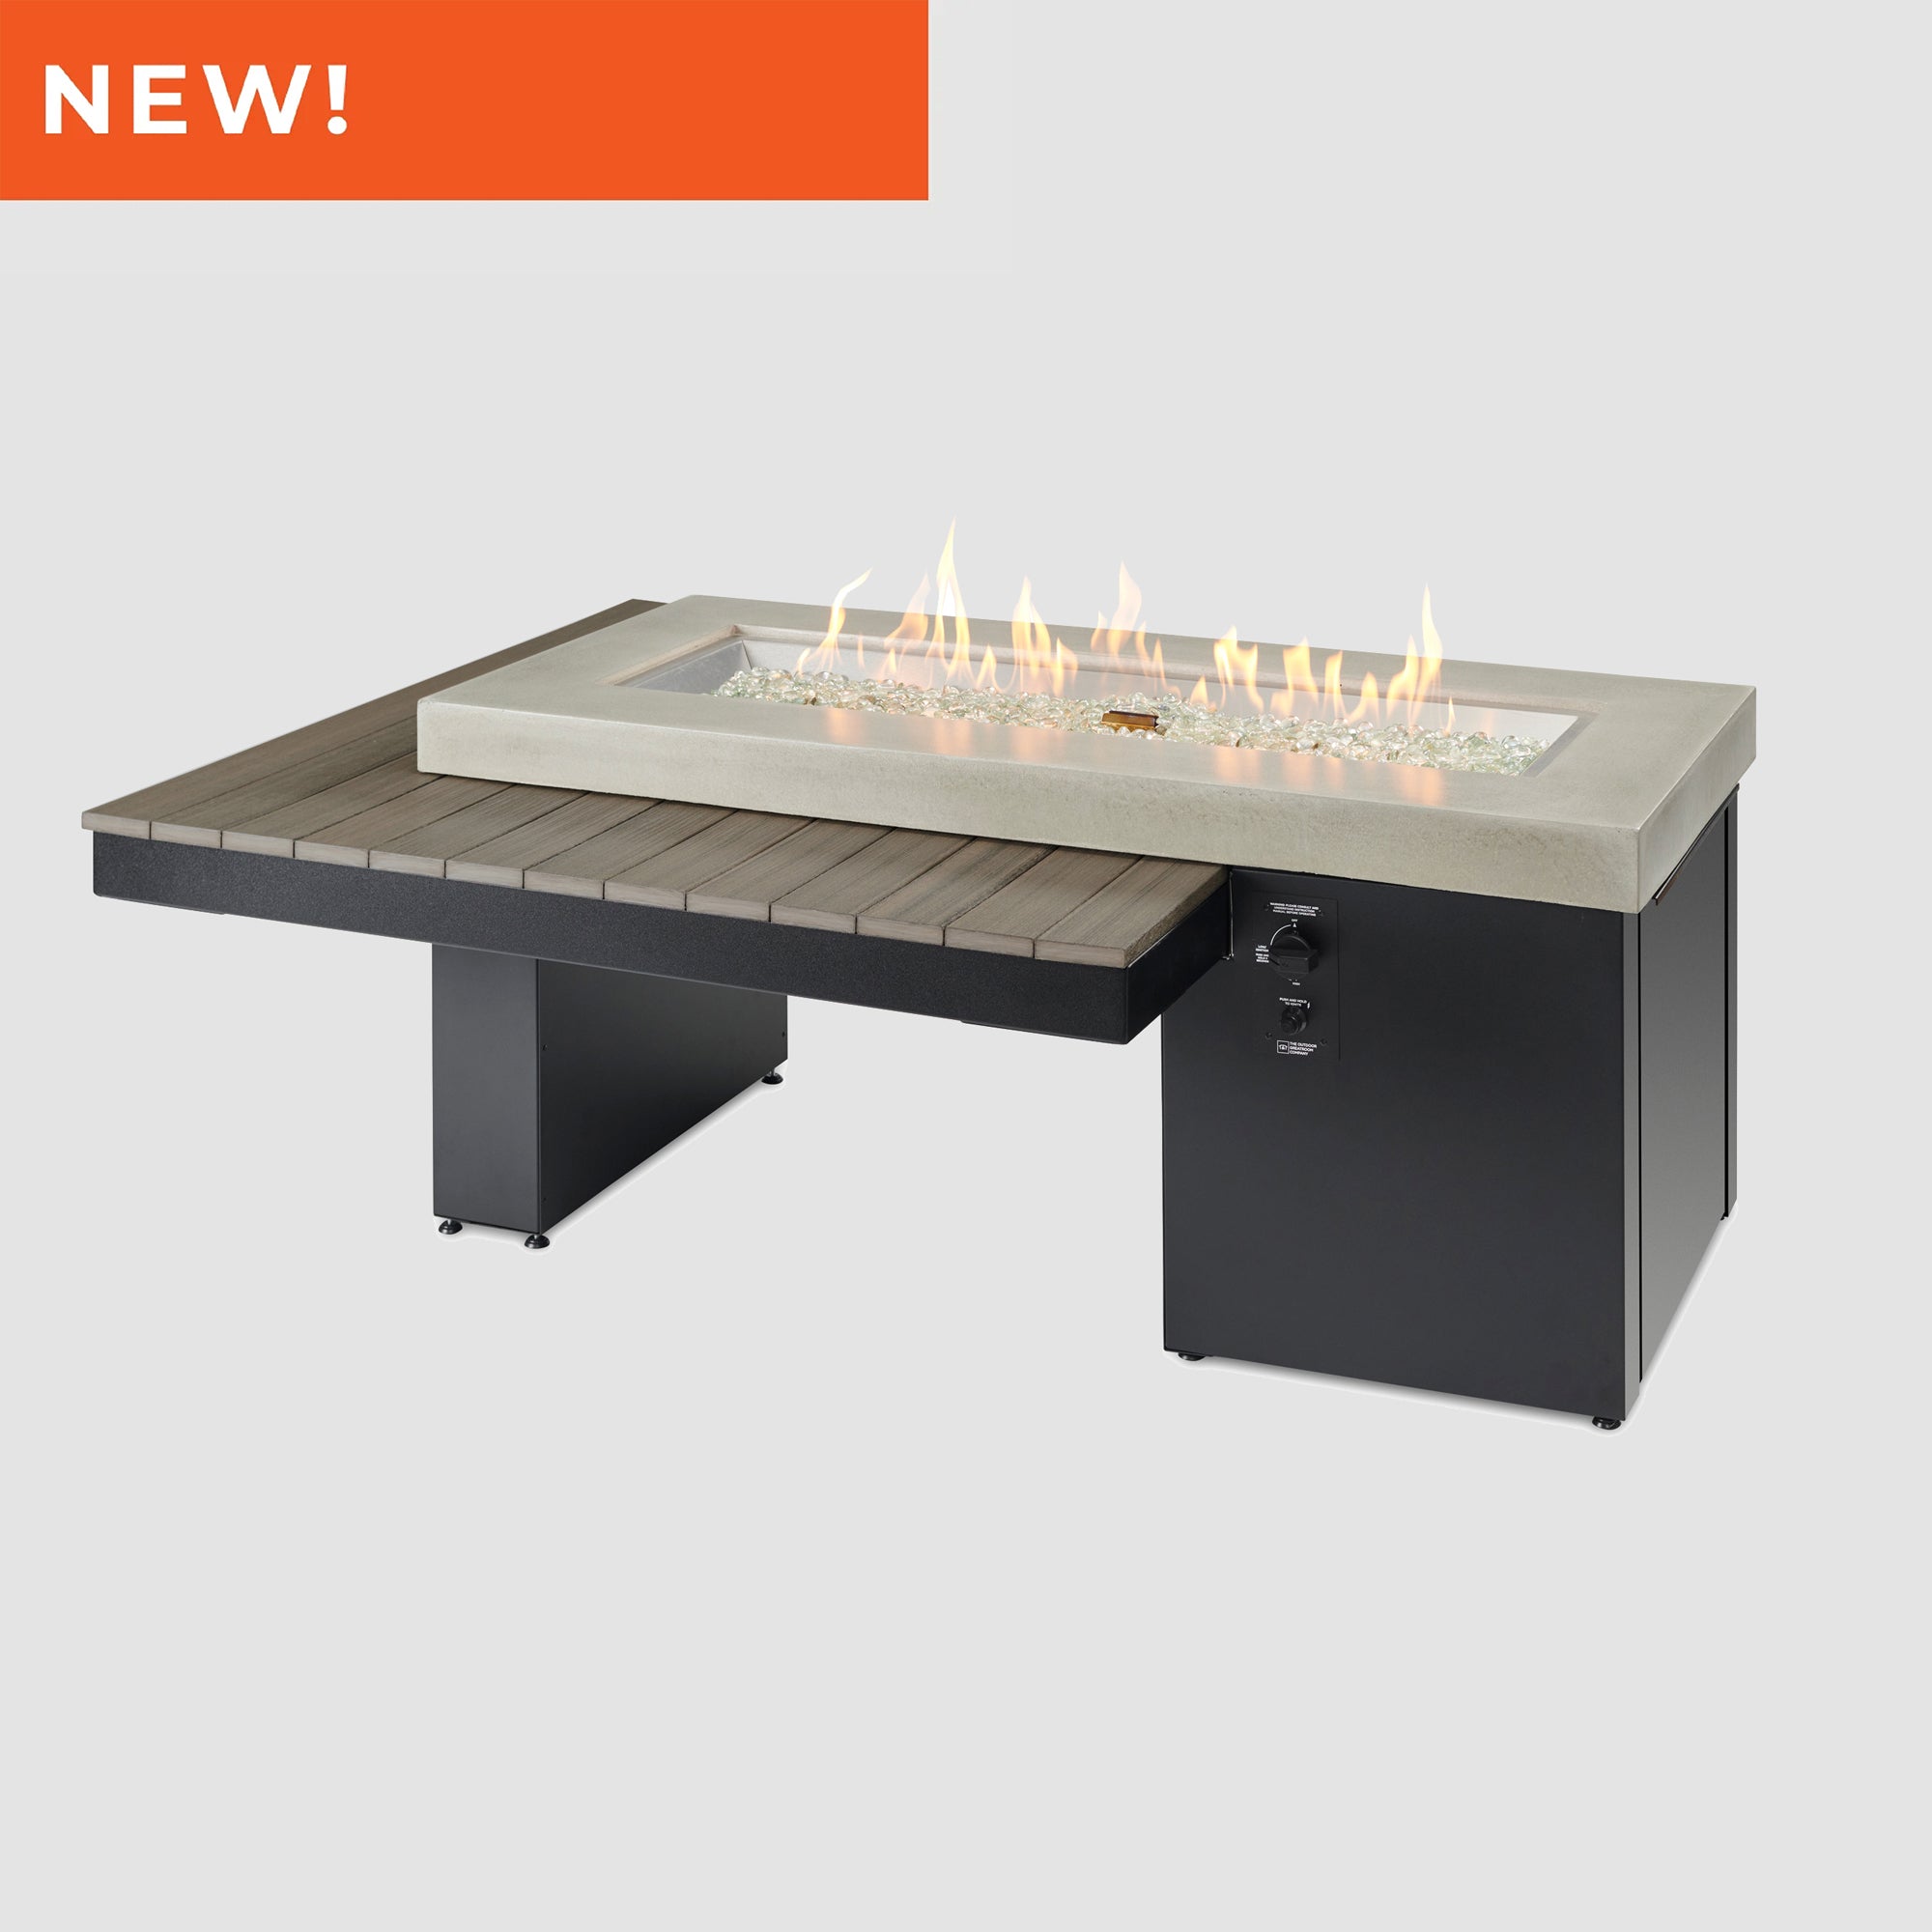 Uptown Coastal Grey Linear Gas Fire Pit Table